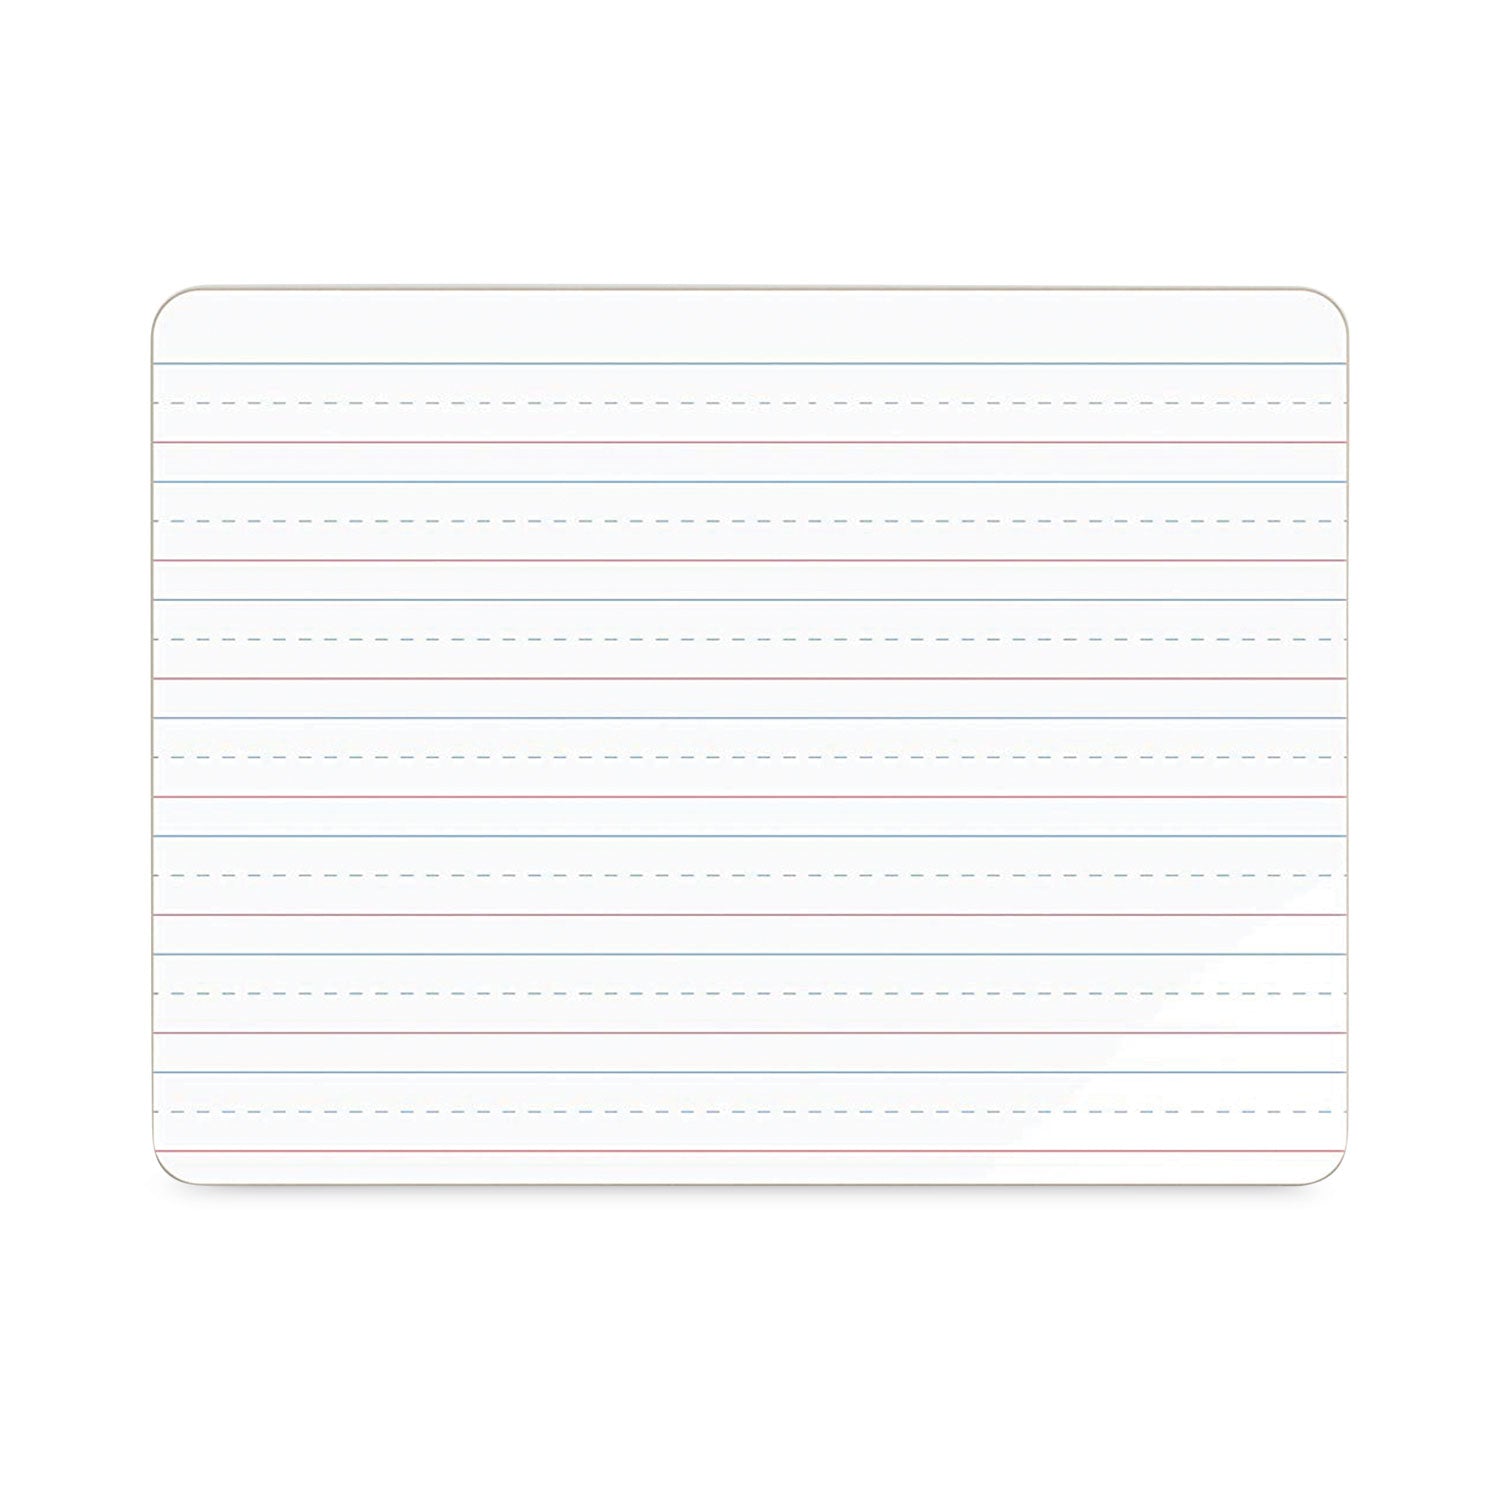 double-sided-dry-erase-lap-board-12-x-9-white-surface-24-pack_ubr4863u0001 - 1